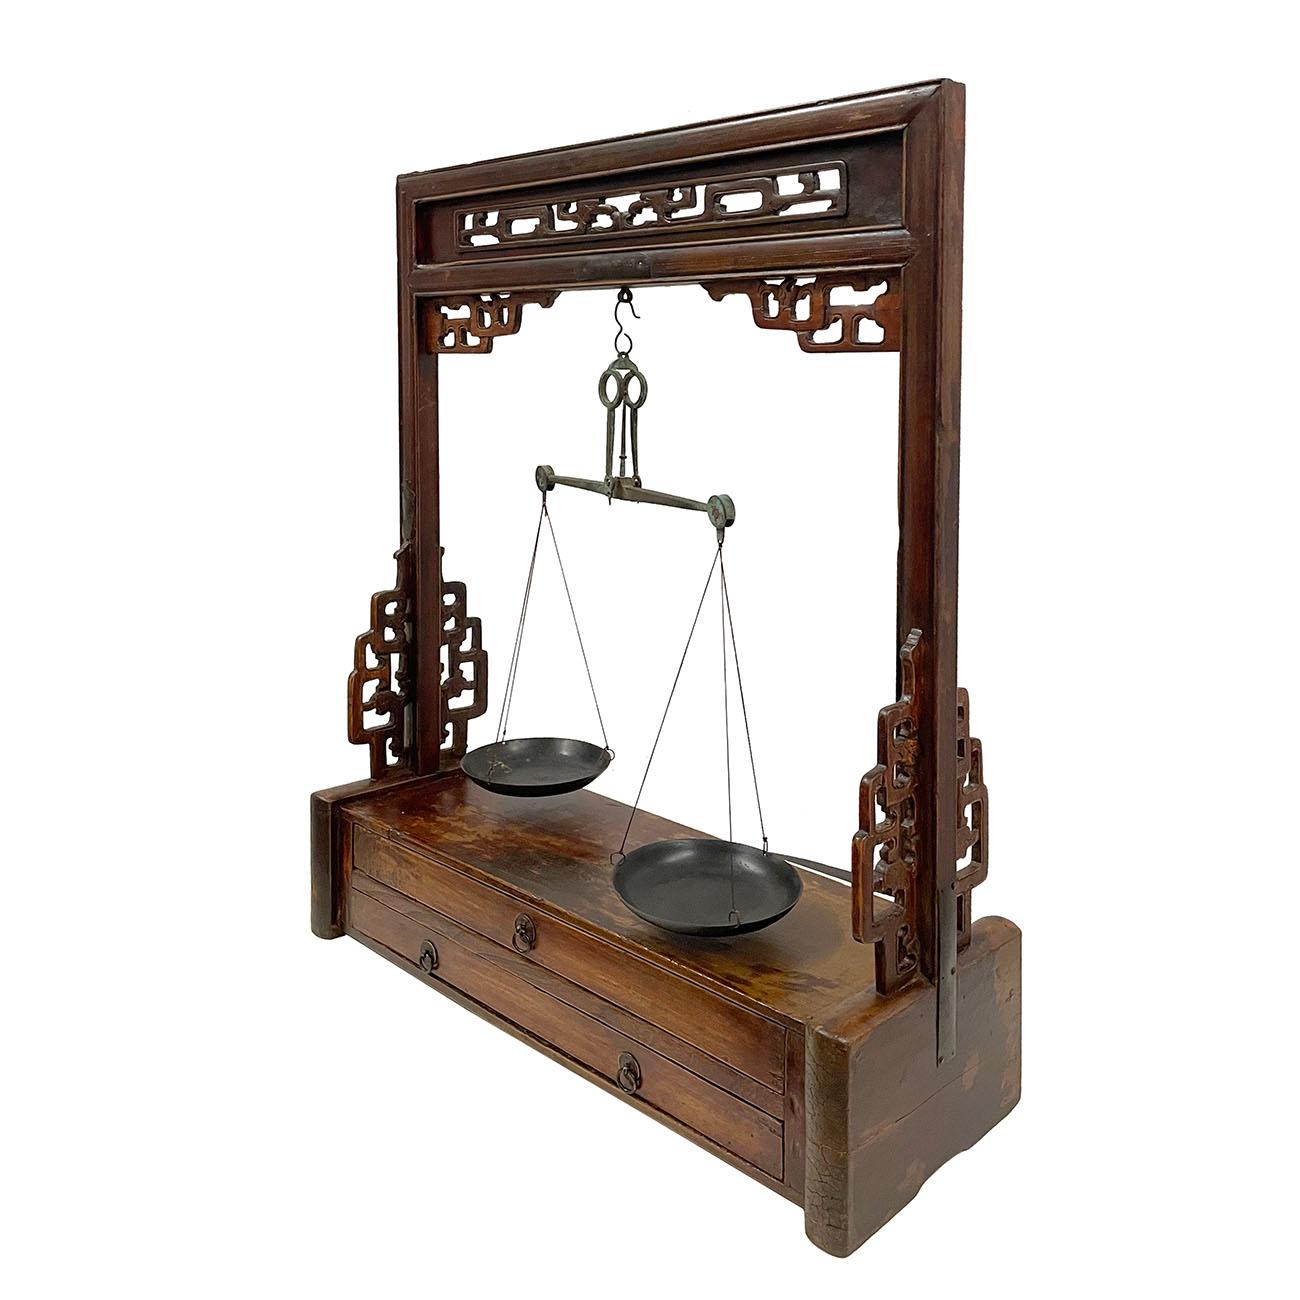 Beautiful Chinese carved wood apothecary balance scale stand with a set of 30 pieces scale weights and storage drawers. It features beautiful carved fretwork on the top and sides featuring brass metal hardware and trim. It has two drawers on the